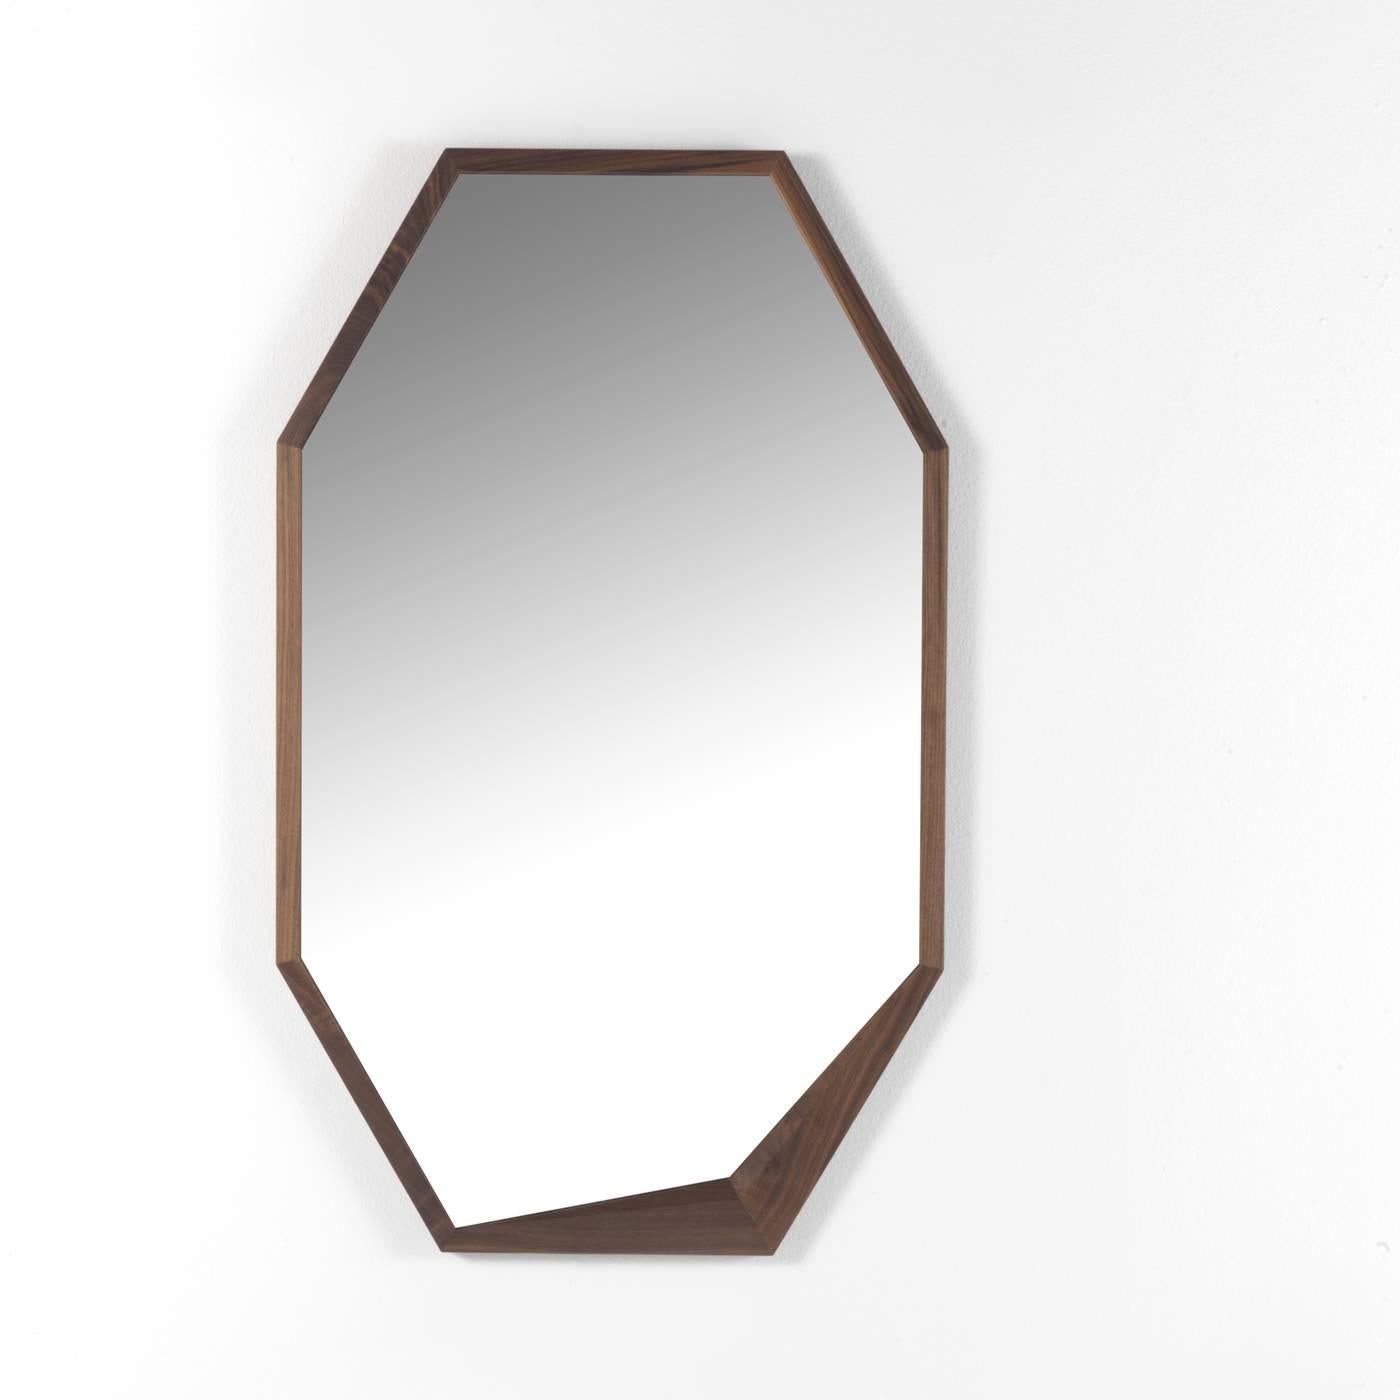 This sophisticated mirror has a Minimalist silhouette that is elegant and timeless. Its frame is in solid Canaletto walnut with a charming, irregular detail adorning one of the corners of its elongated hexagonal shape. A piece suitable for any